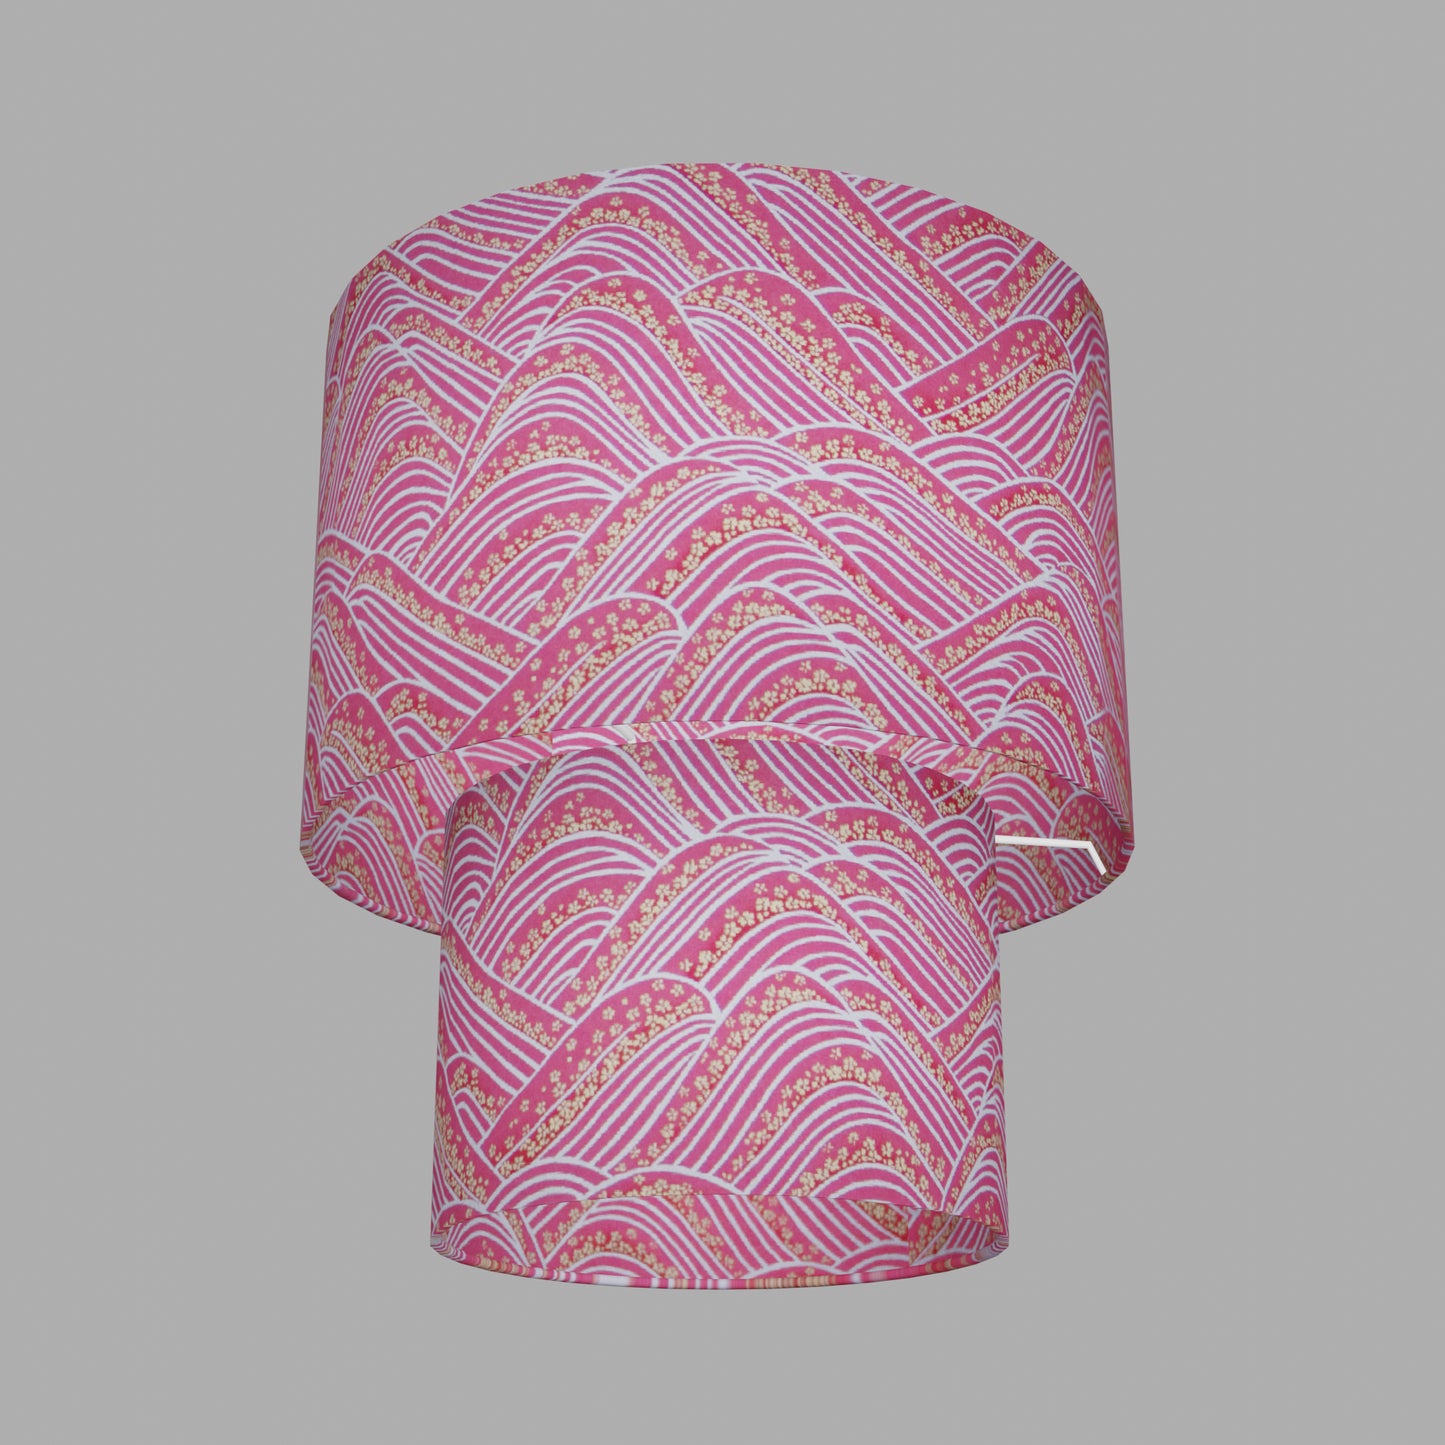 2 Tier Lamp Shade - W04 - Pink Hills with Gold Flowers, 30cm x 20cm & 20cm x 15cm